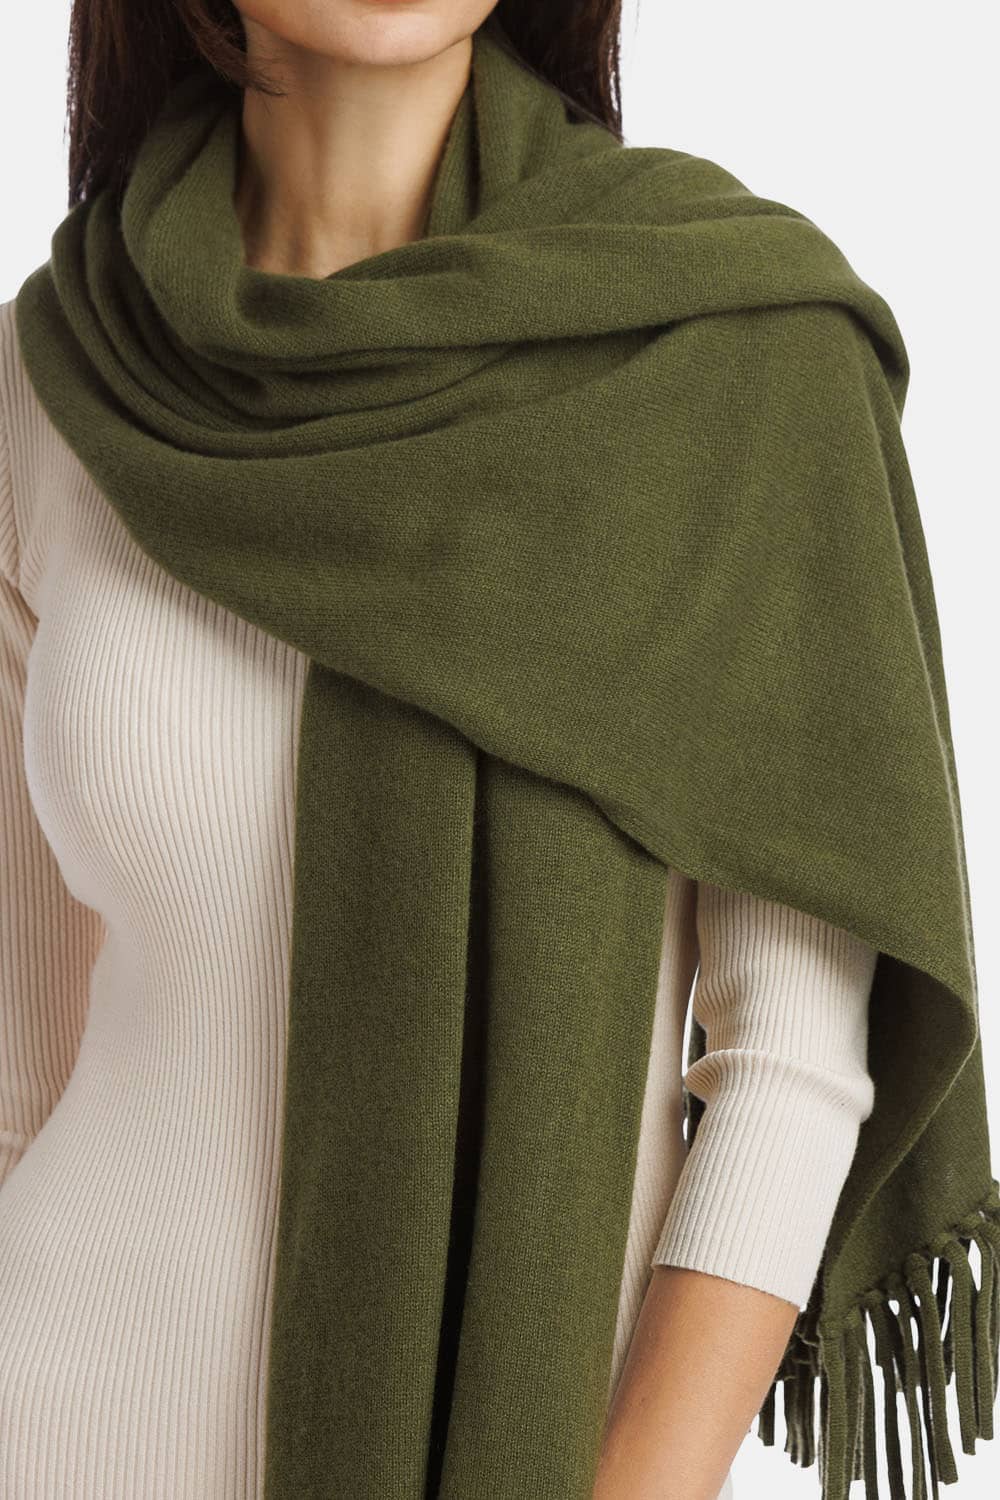 Women's 100% Pure Cashmere Knit Shawl Wrap with Fringe and Gift Box Womens>Accessories>Scarf Fishers Finery 